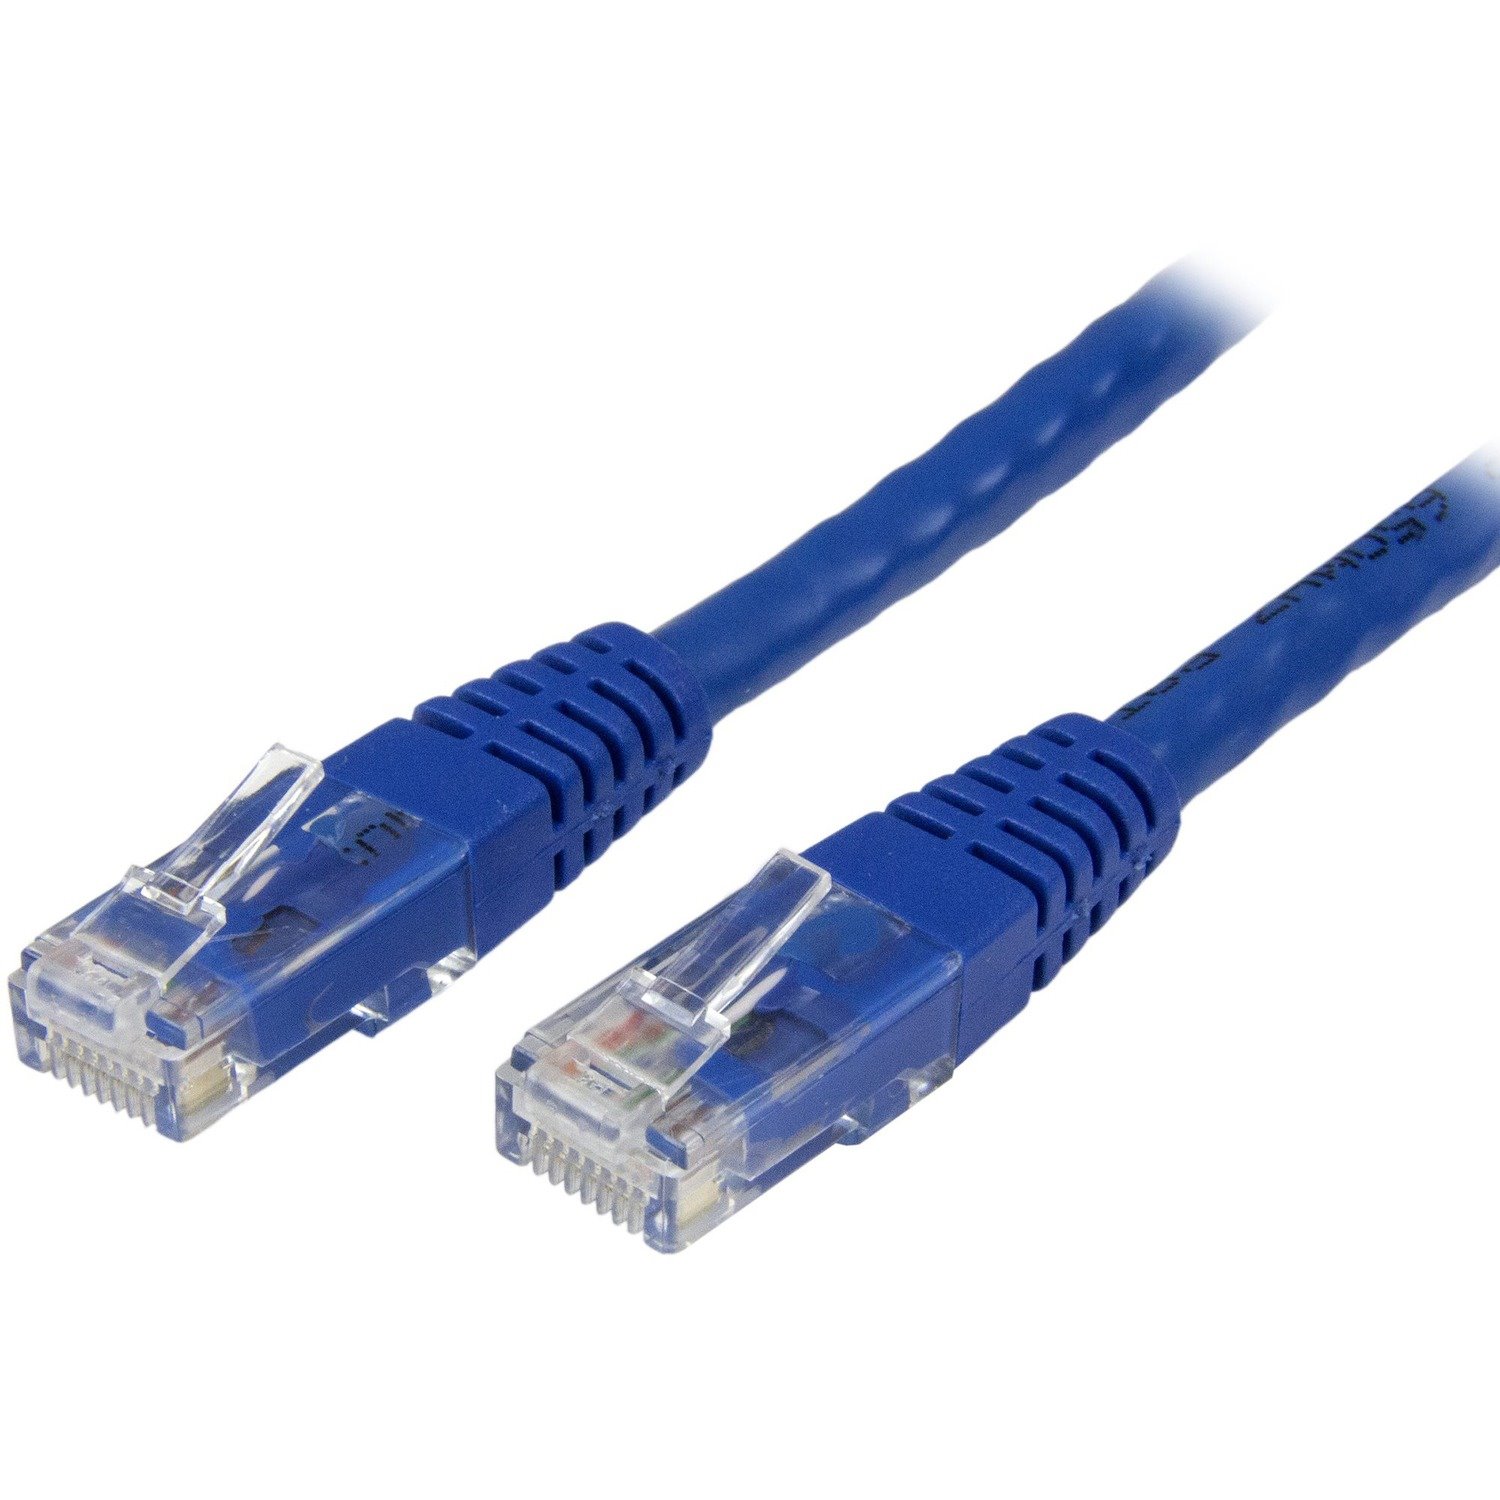 StarTech.com 5ft CAT6 Ethernet Cable - Blue Molded Gigabit - 100W PoE UTP 650MHz - Category 6 Patch Cord UL Certified Wiring/TIA